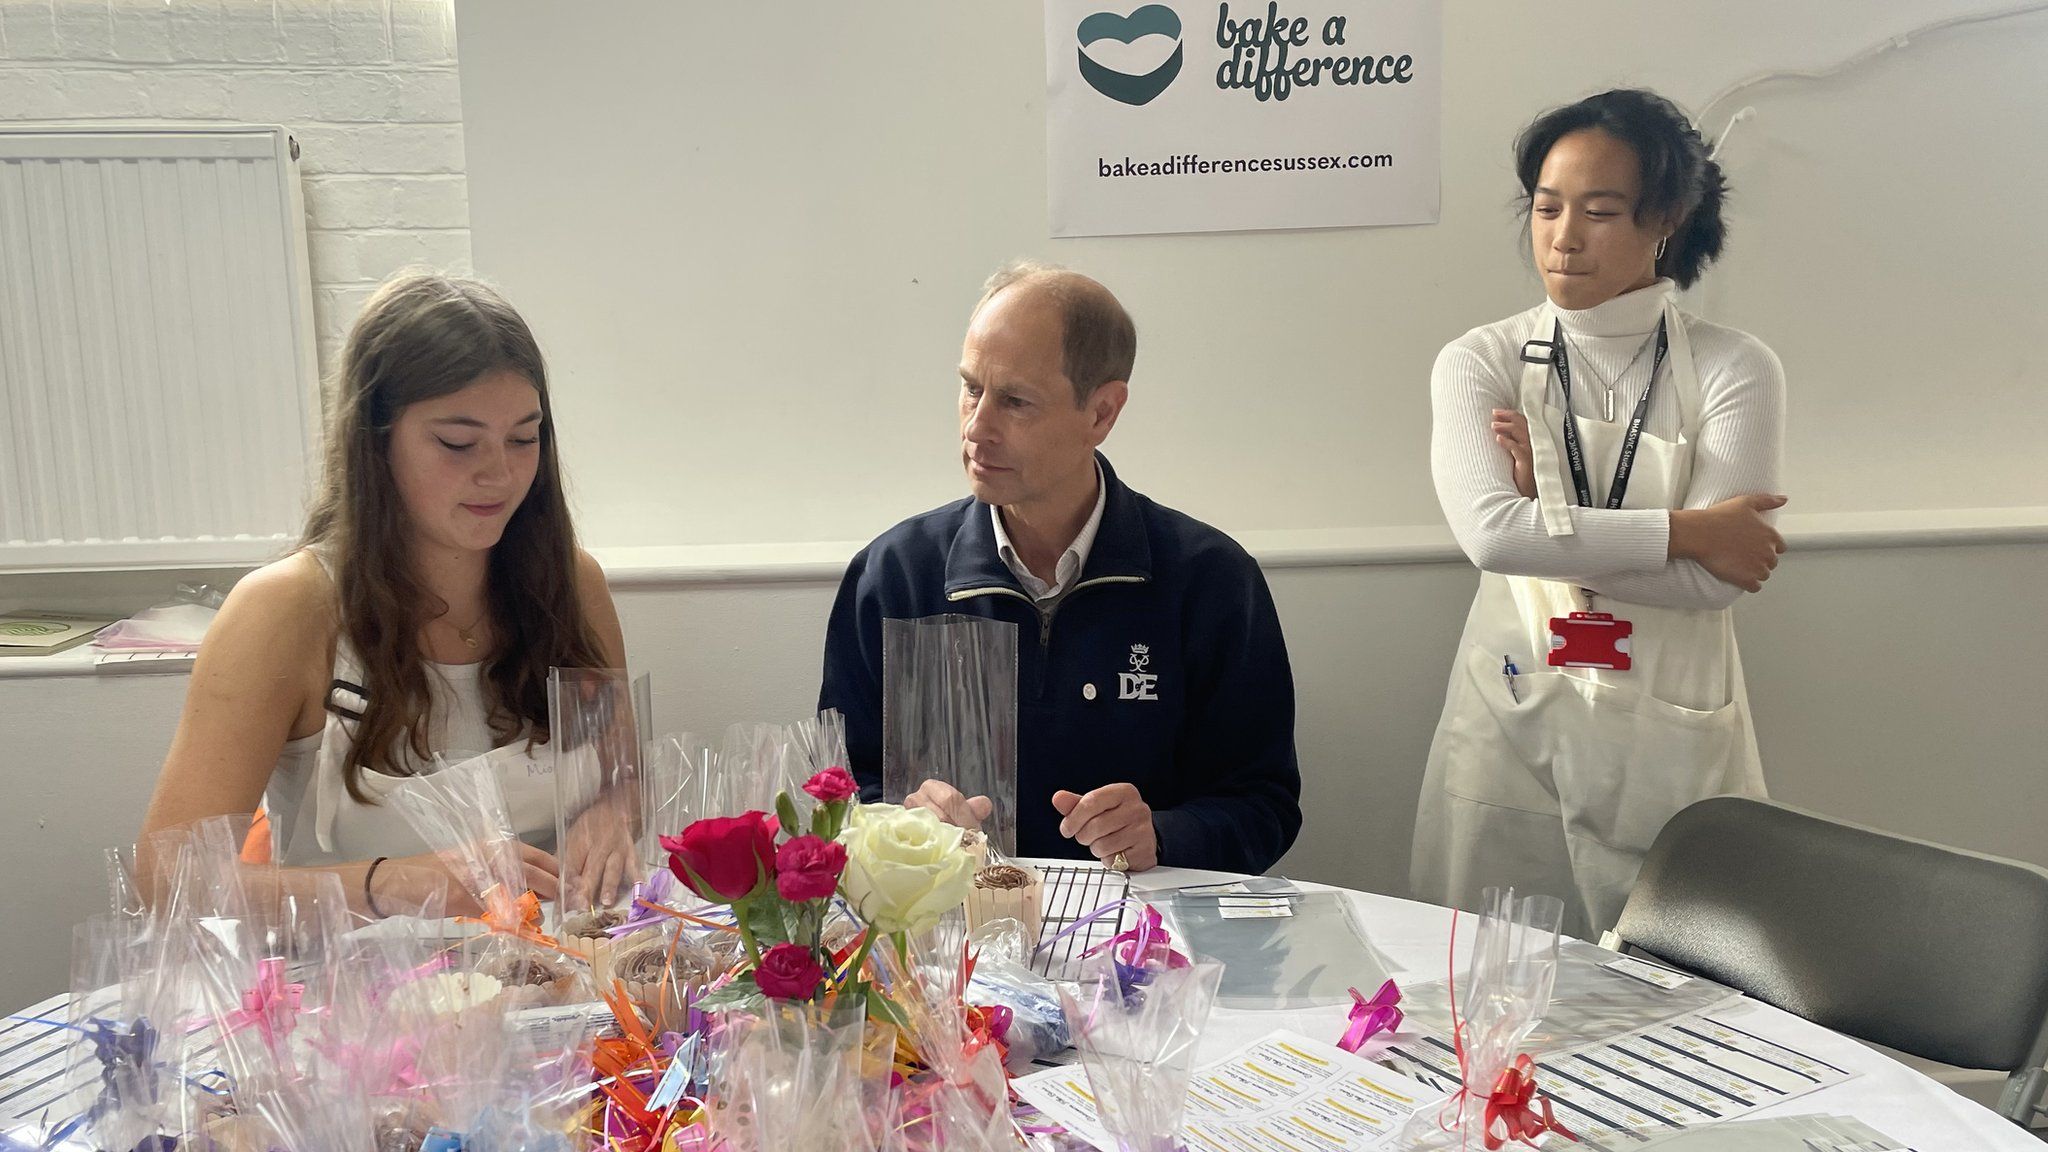 Duke of Edinburgh meets young people baking for food charities in Brighton